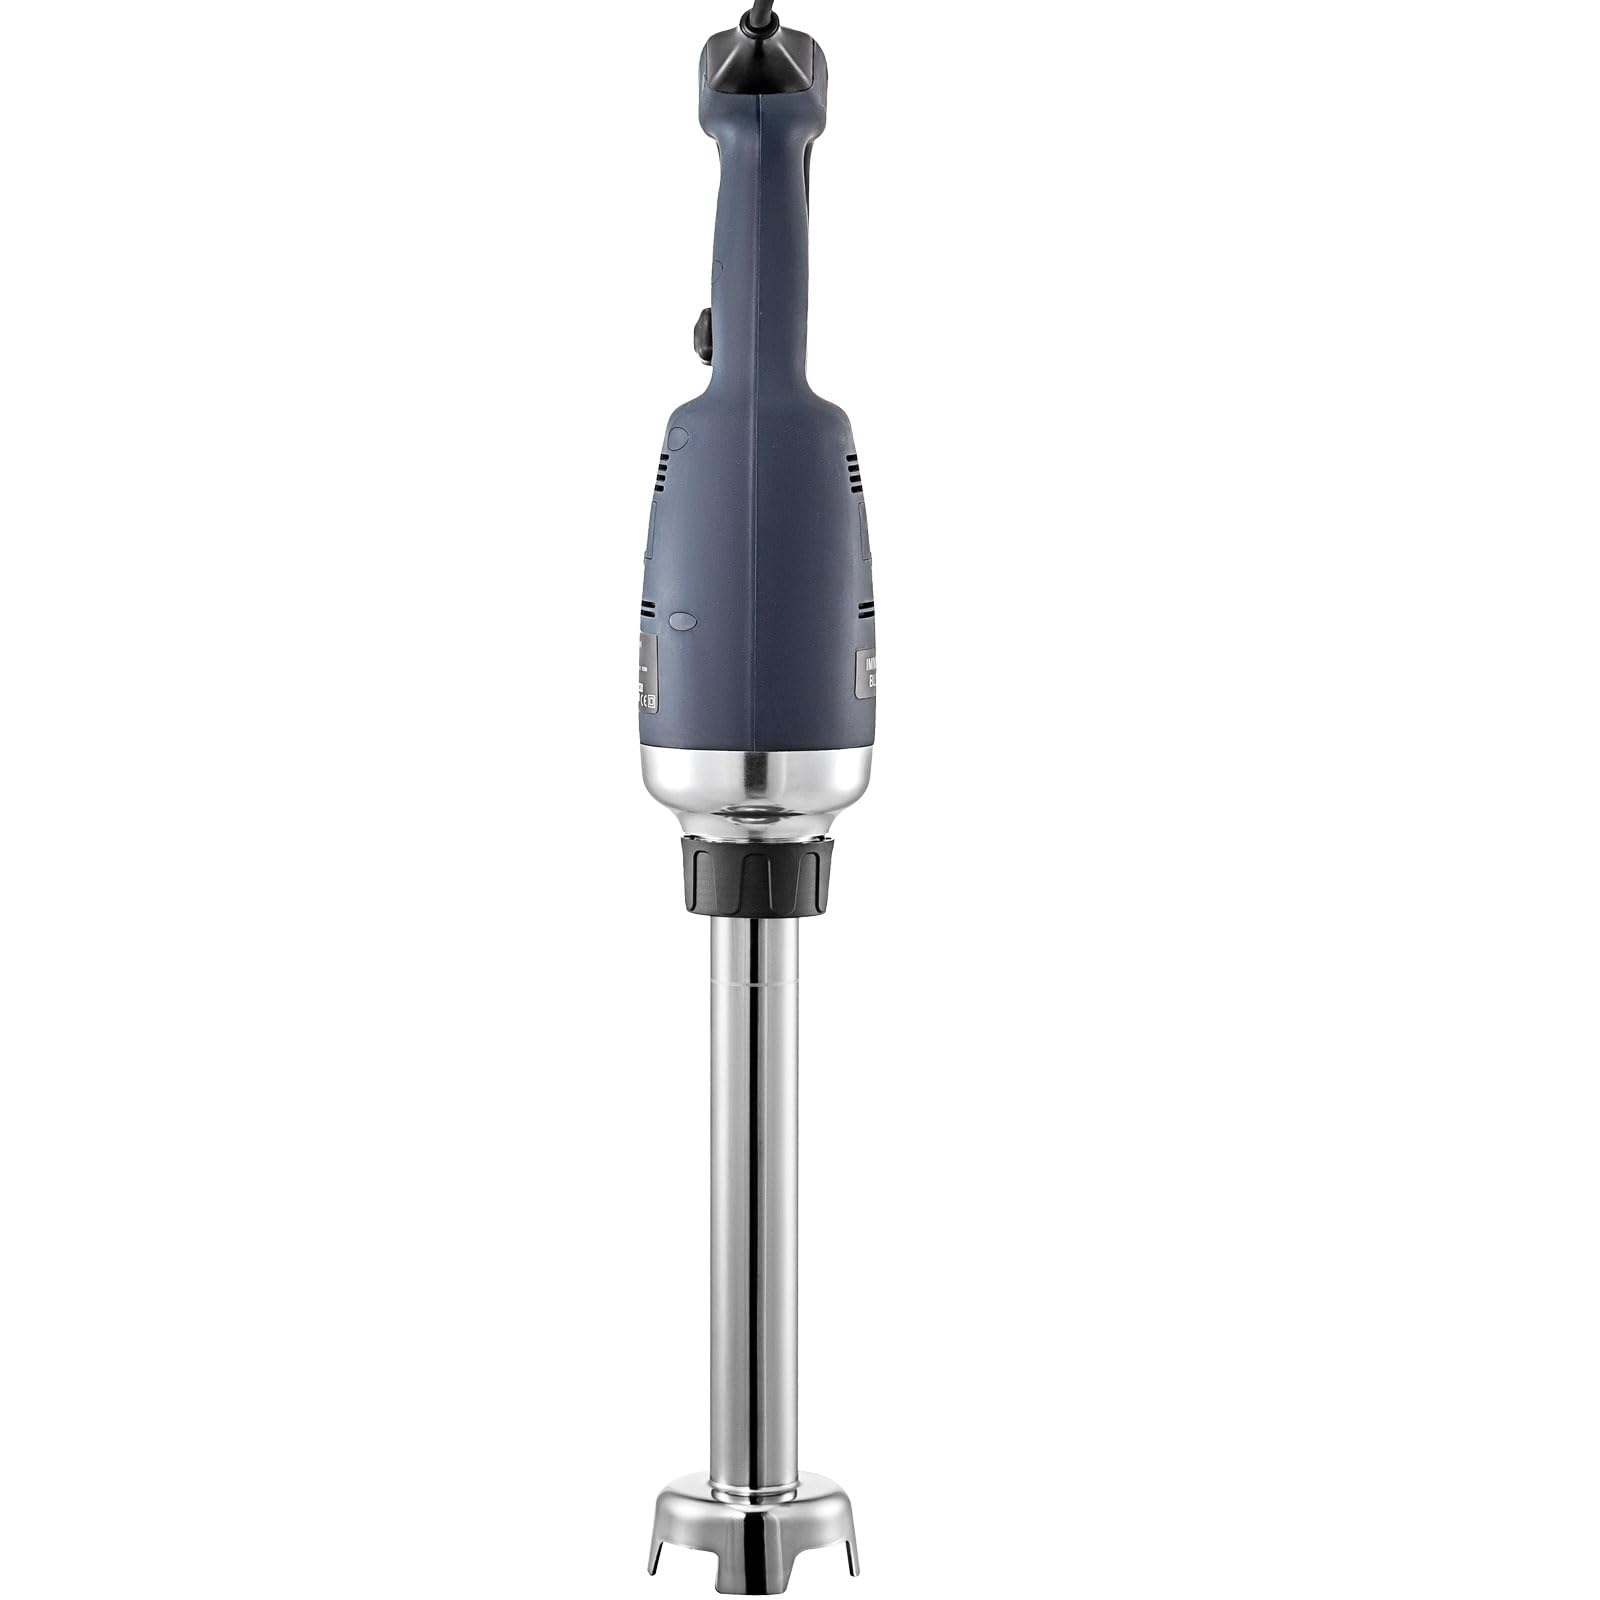 VEVOR Commercial Immersion Blender 350W Power, Hand Held Mixer with 9.8-Inch 304 Stainless Steel Removable Shaft, Electric Stick Blender Variable Speed 4000-16000RPM